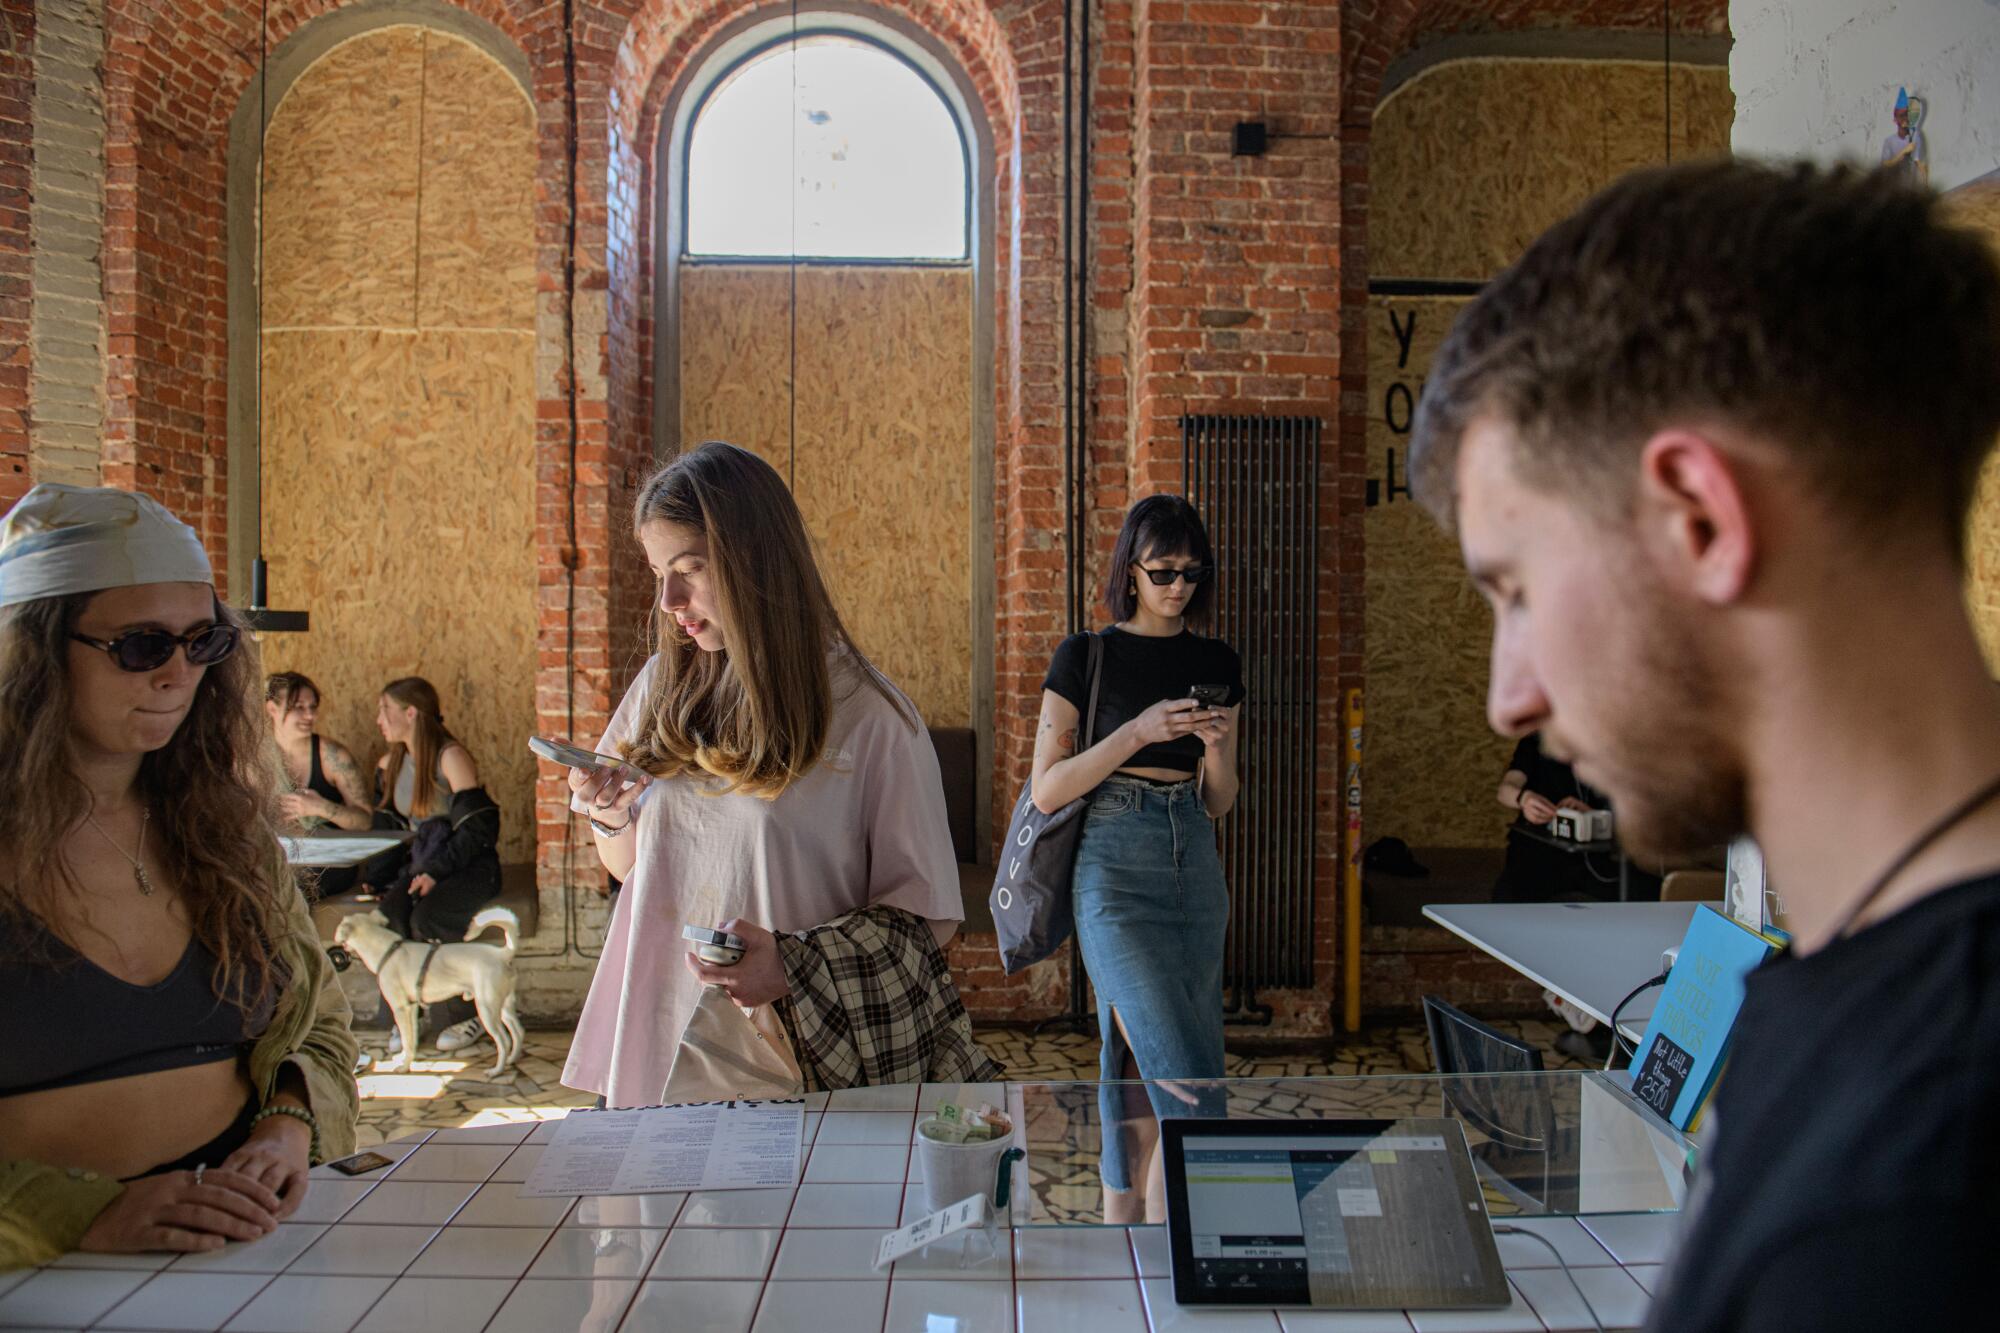 A girl looks at her phone near other people in a coffeehouse with brick walls and boarded-up windows